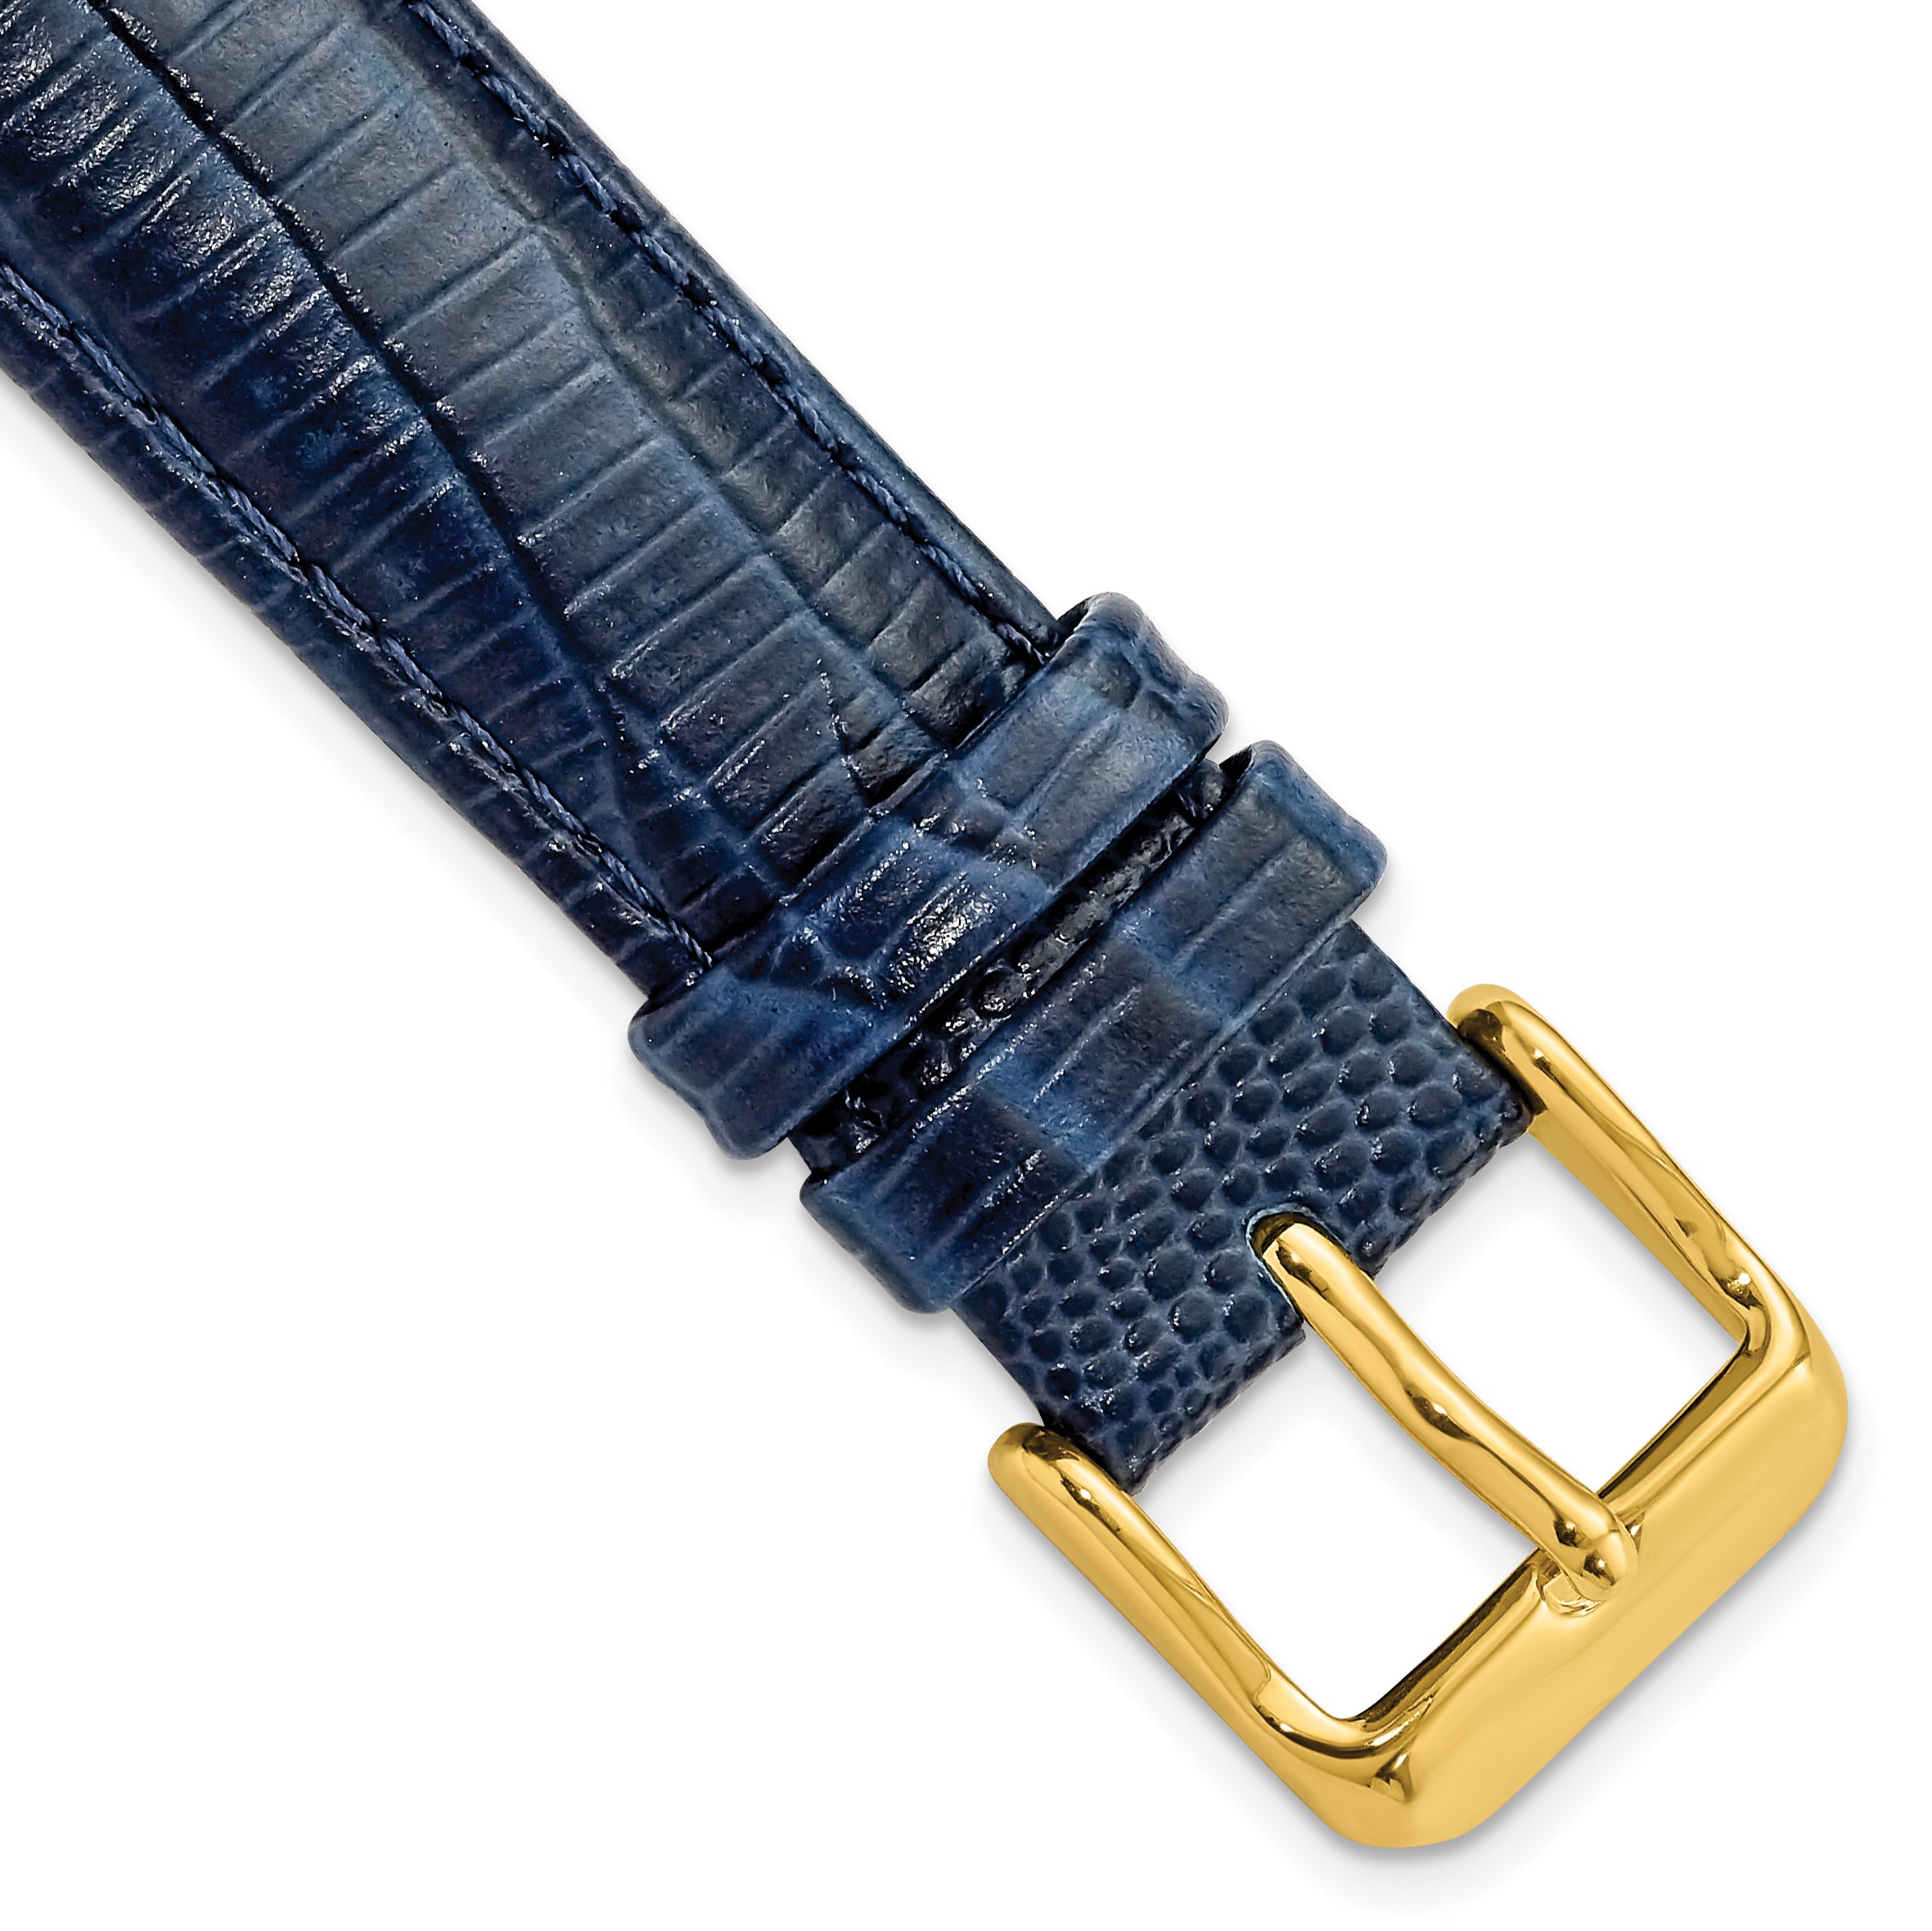 DeBeer 18mm Navy Teju Liz Grain Leather with Gold-tone Buckle 7.5 inch Watch Band